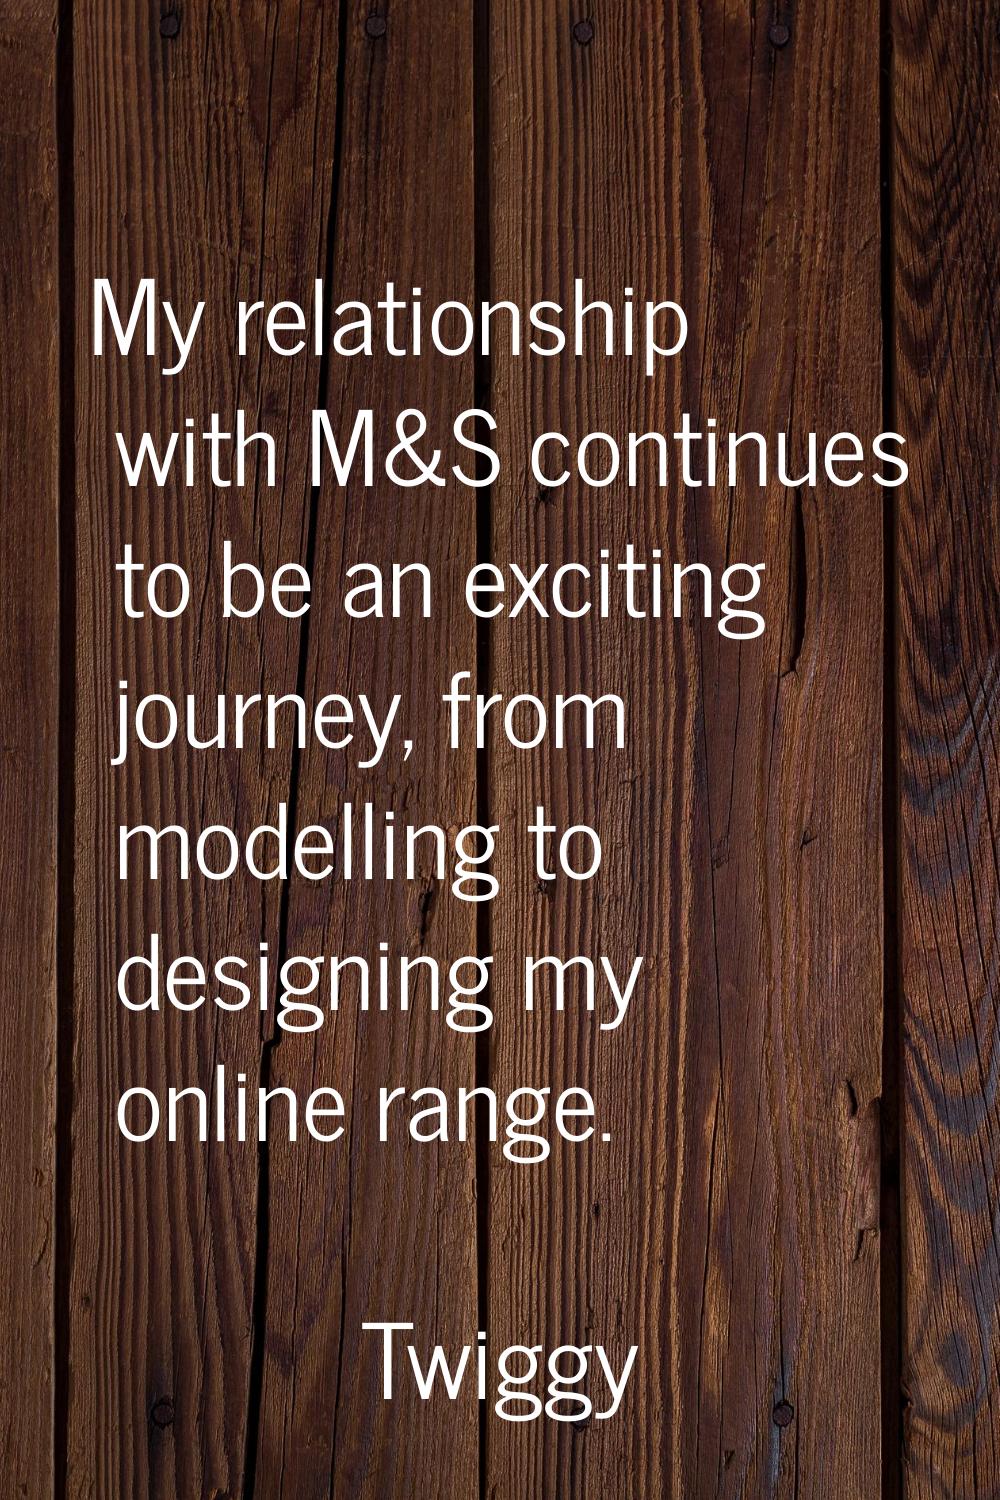 My relationship with M&S continues to be an exciting journey, from modelling to designing my online